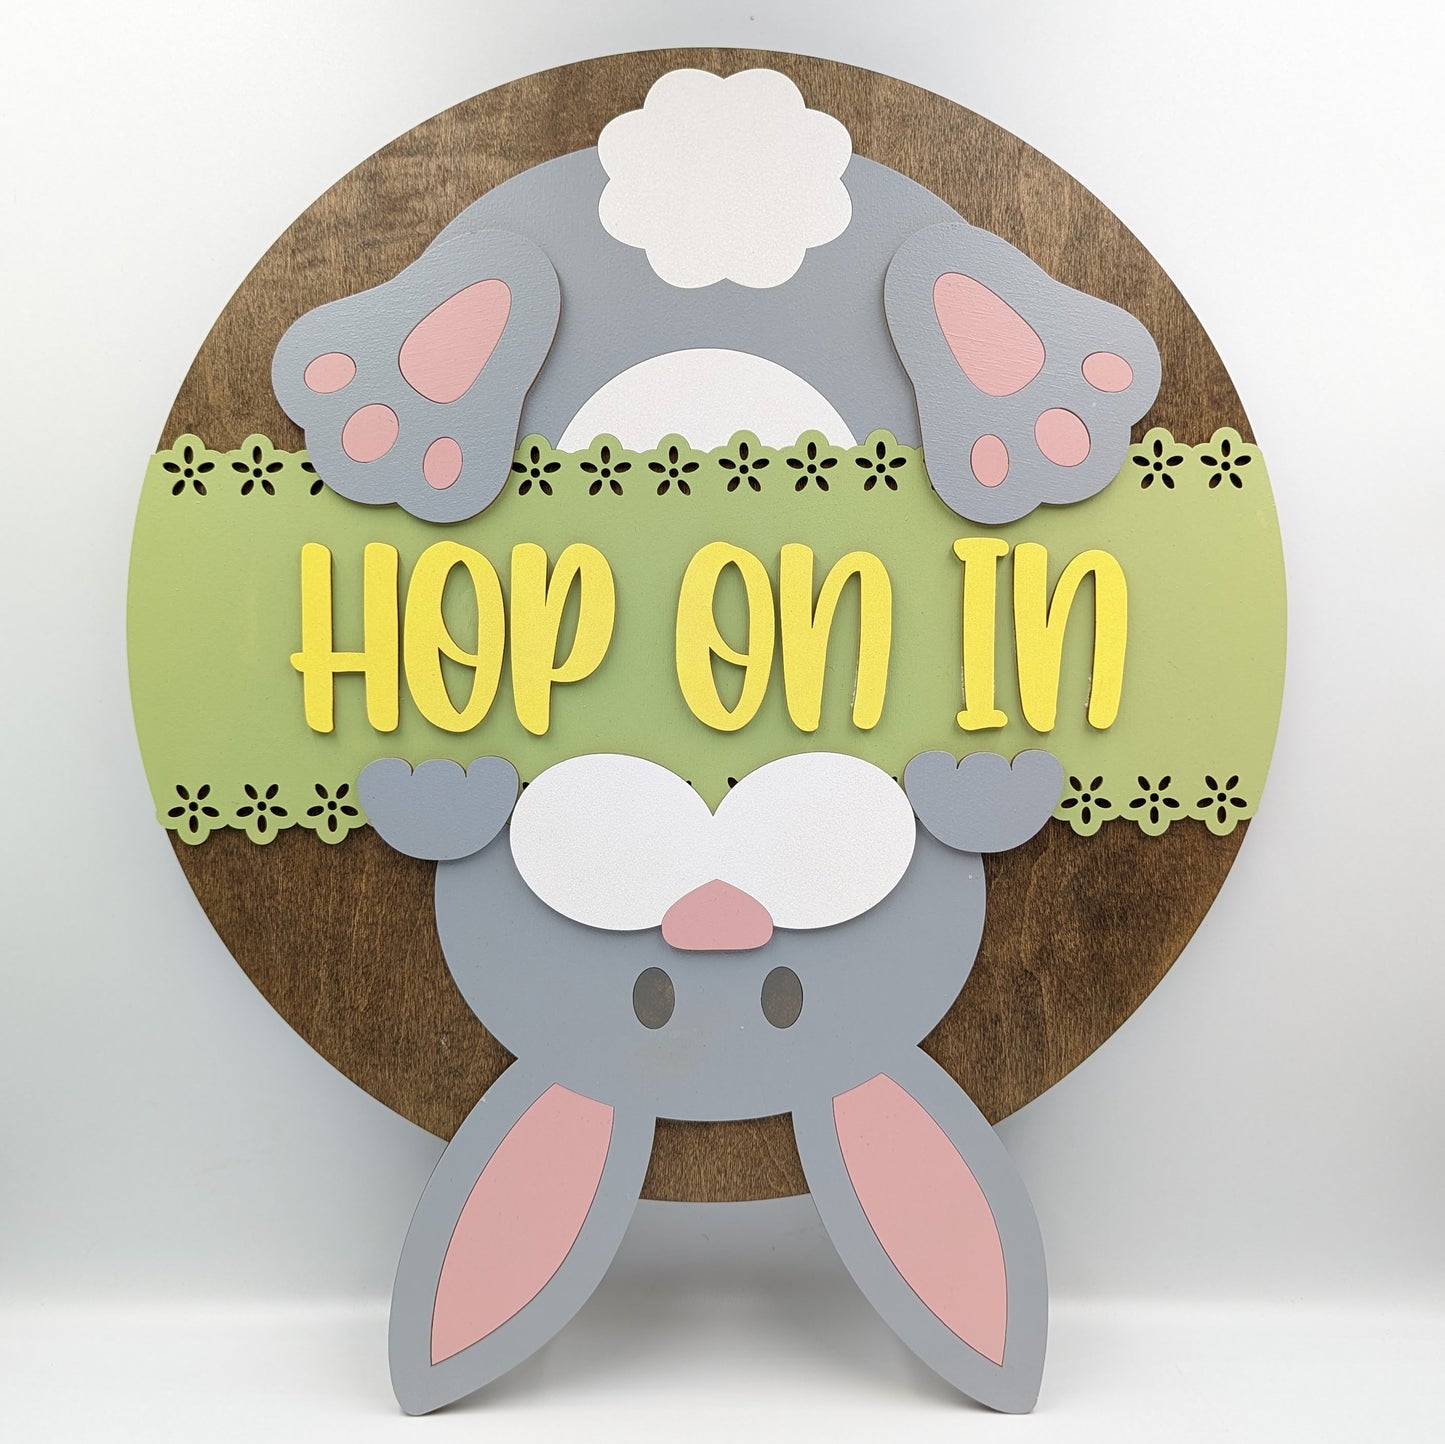 15 inch hand-painted wooden round door sign featuring an upside down Easter Bunny and the message "Hop On In". Designed for display on a covered porch or entryway out of direct weather elements. Can be hung using attached jute twine or sawtooth hanger.